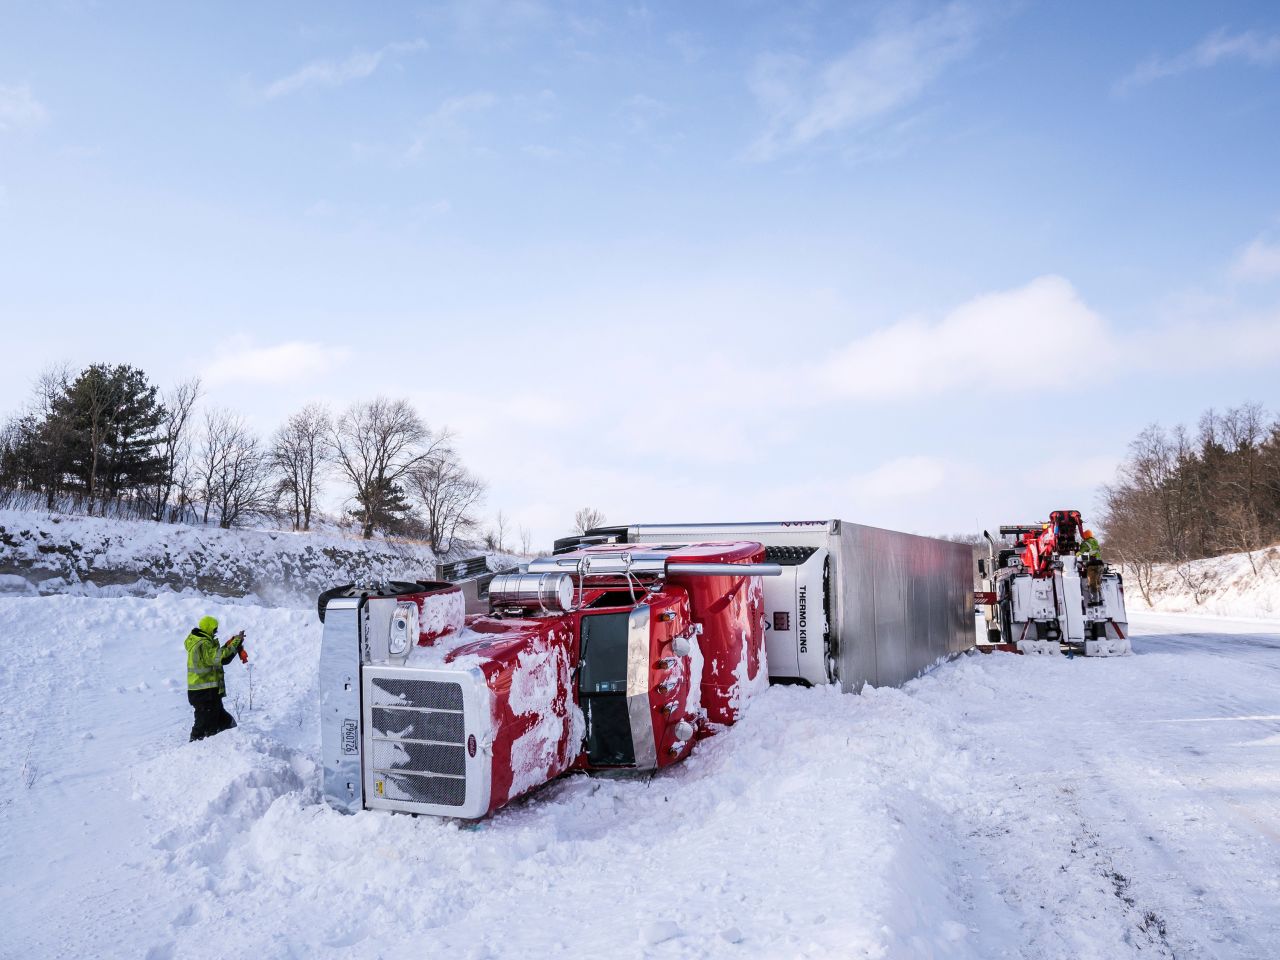 Tow-truck personnel work to remove an overturned semi on the median of Interstate 90, southeast of Rochester, Minnesota, on January 28.